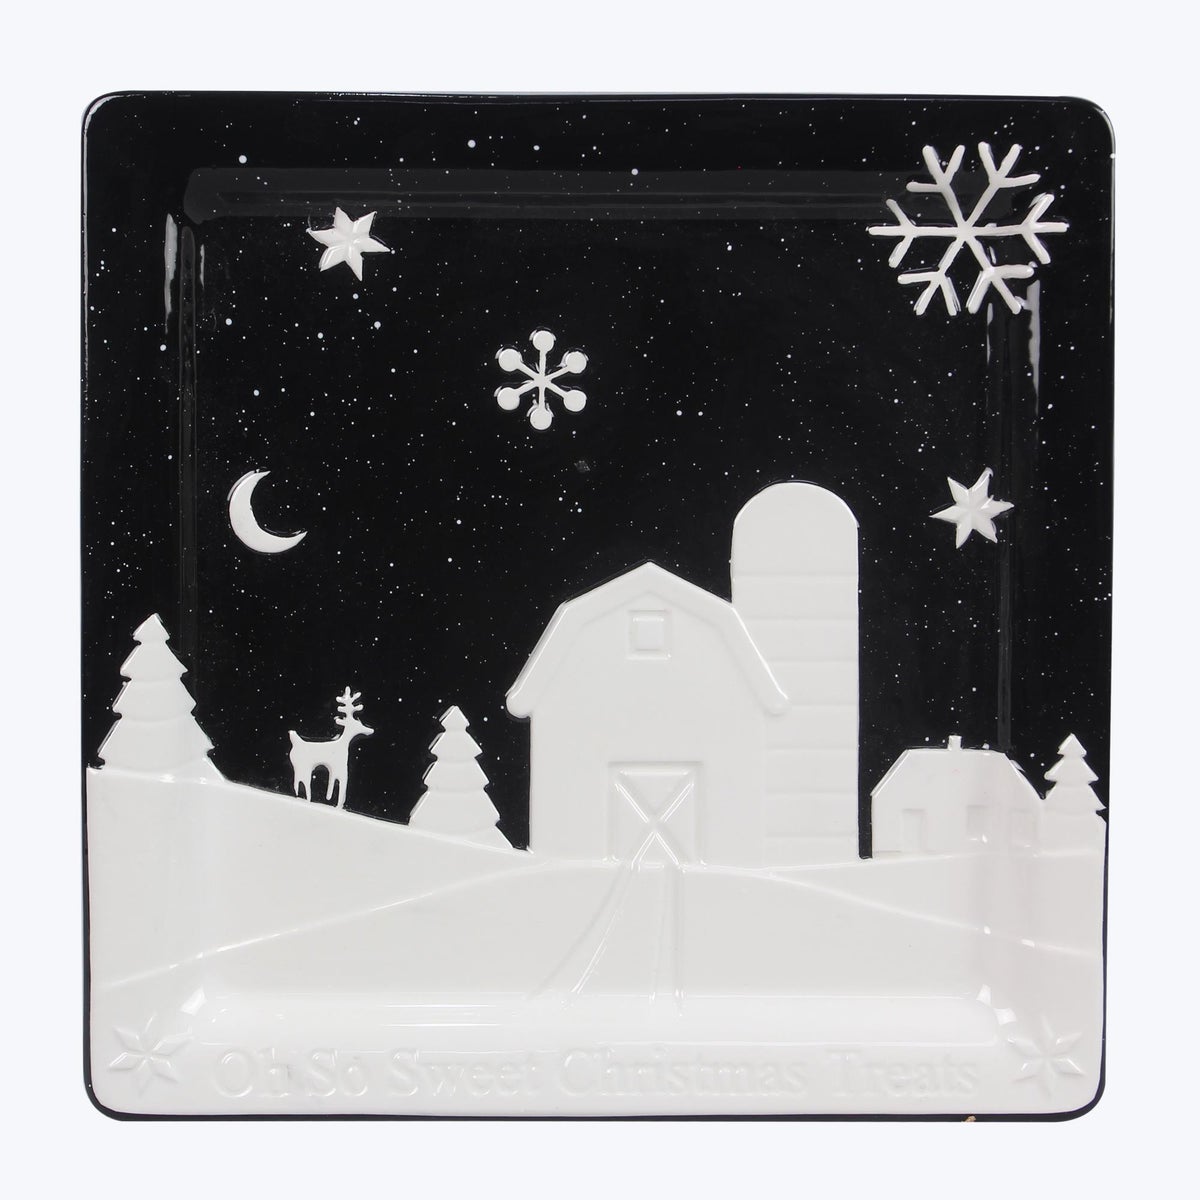 Ceramic Country Christmas Cookie Plate w/ Dish Towel Set